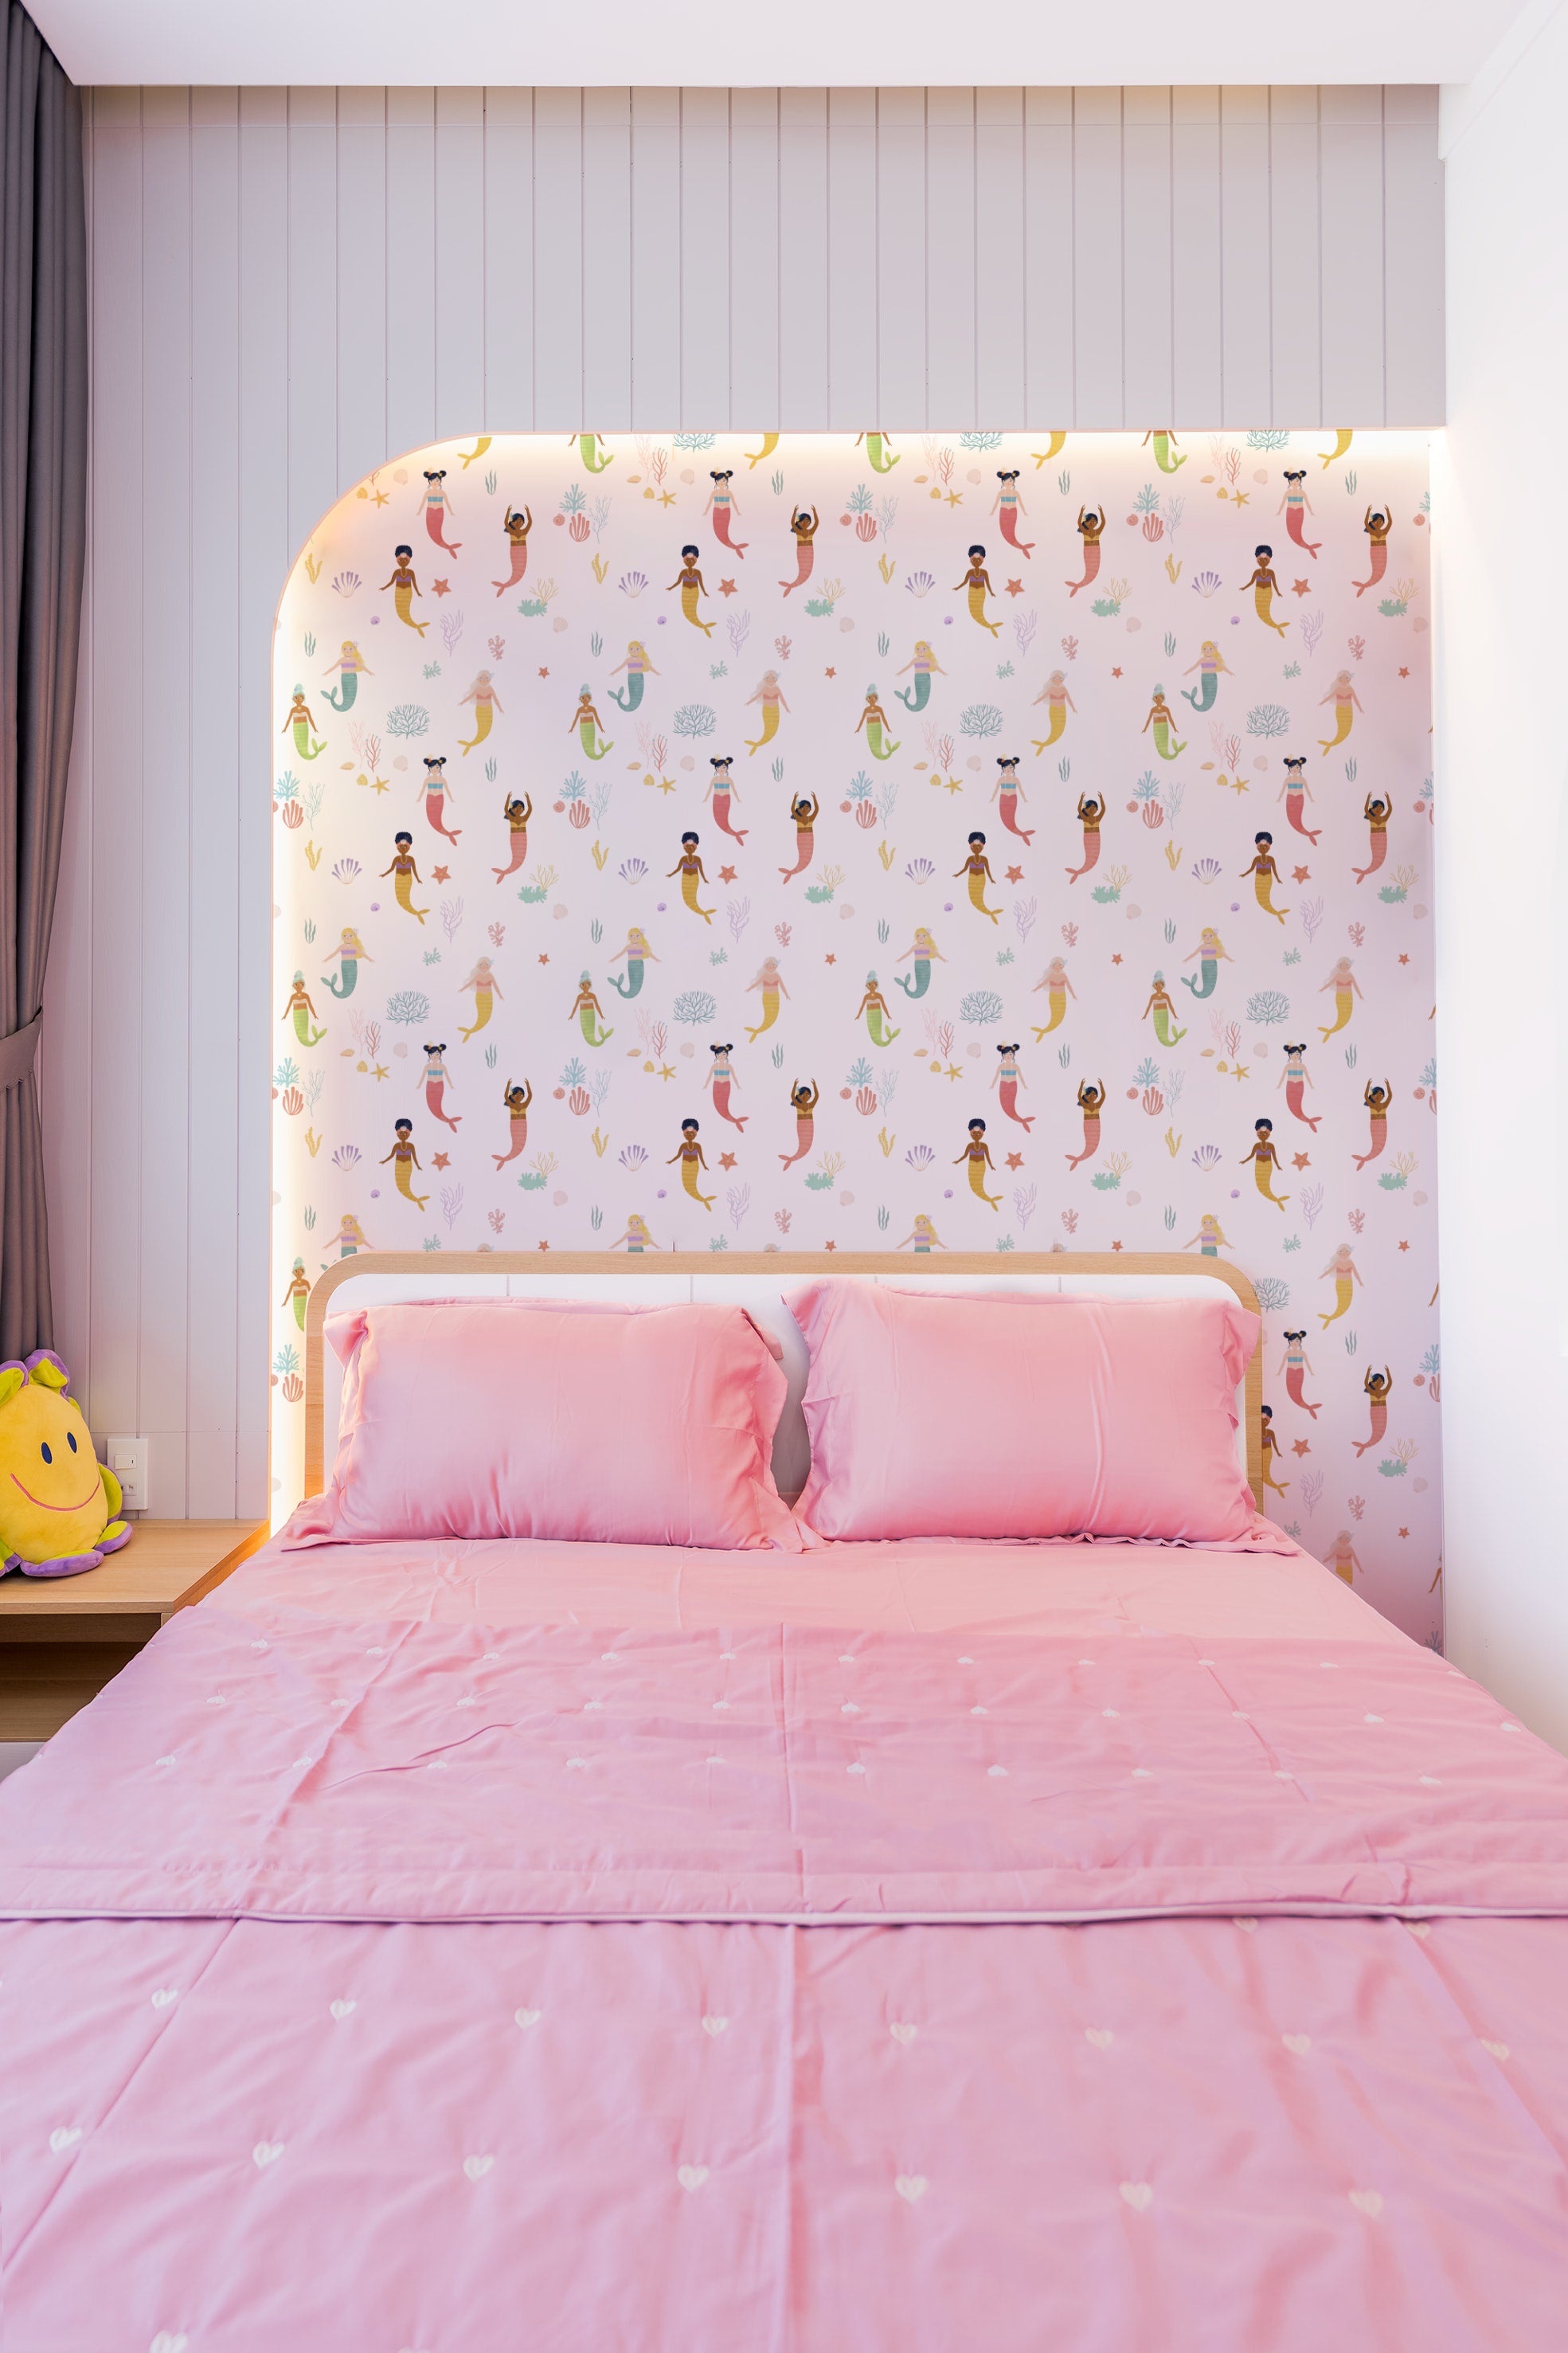 A cozy bedroom setting with Little Mermaids Wallpaper providing a lively and imaginative backdrop. The bed is dressed in pink linens, complementing the colorful mermaids and enhancing the room’s playful and magical atmosphere.